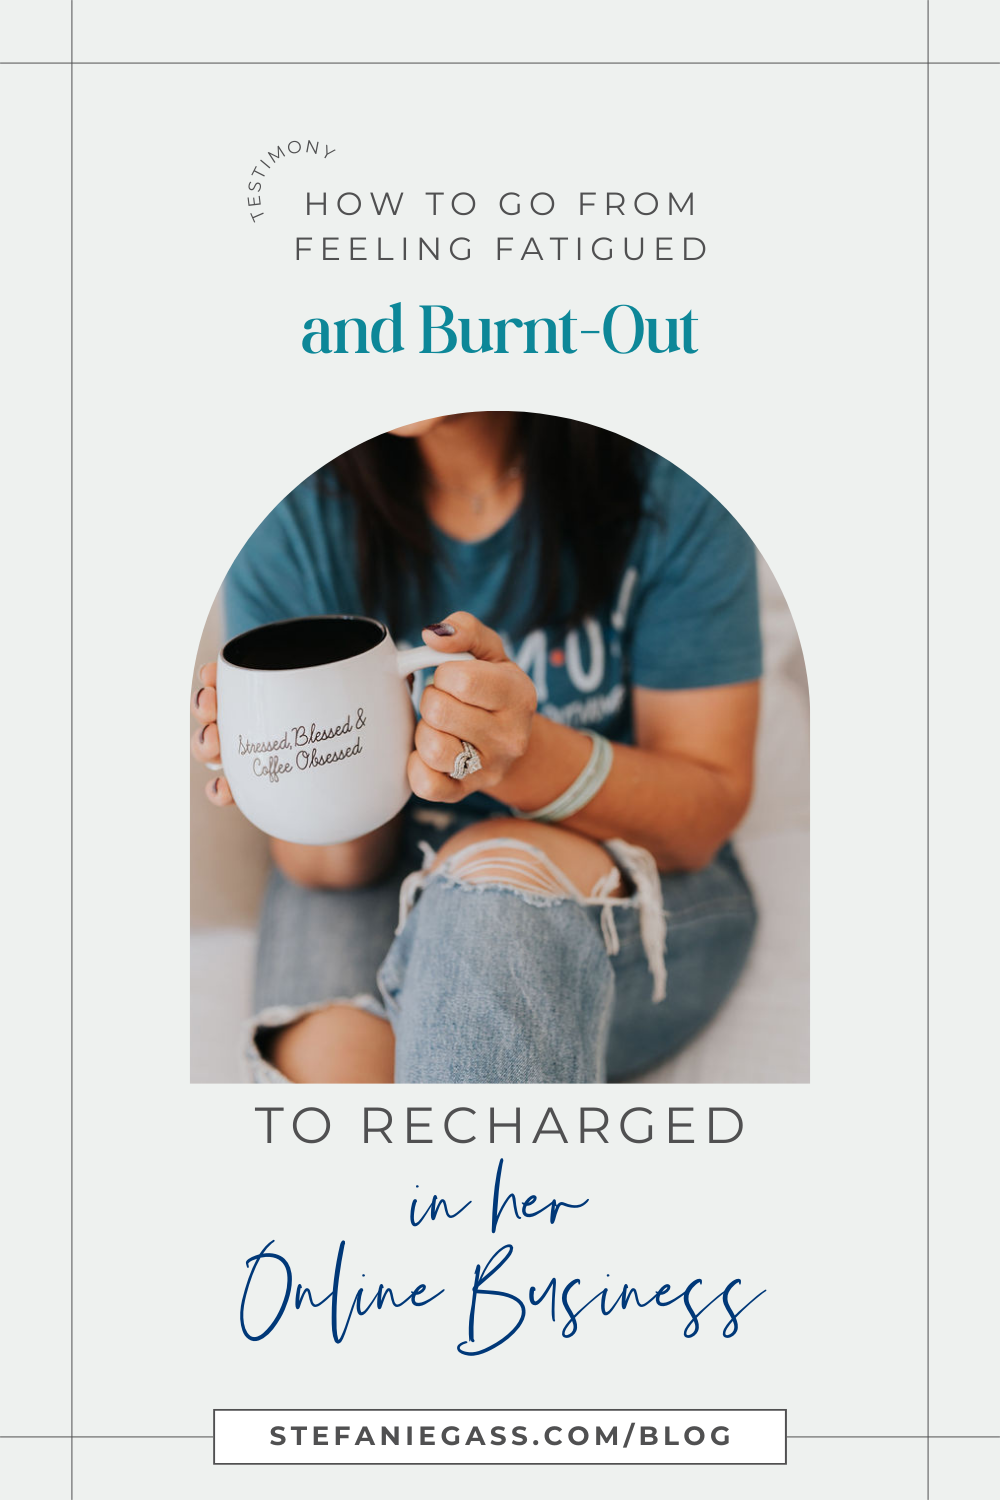 How to go from feeling fatigued and burnt-out to recharged in her online business. Woman siting with cup of coffee, wearing jeans and teal t-shirt